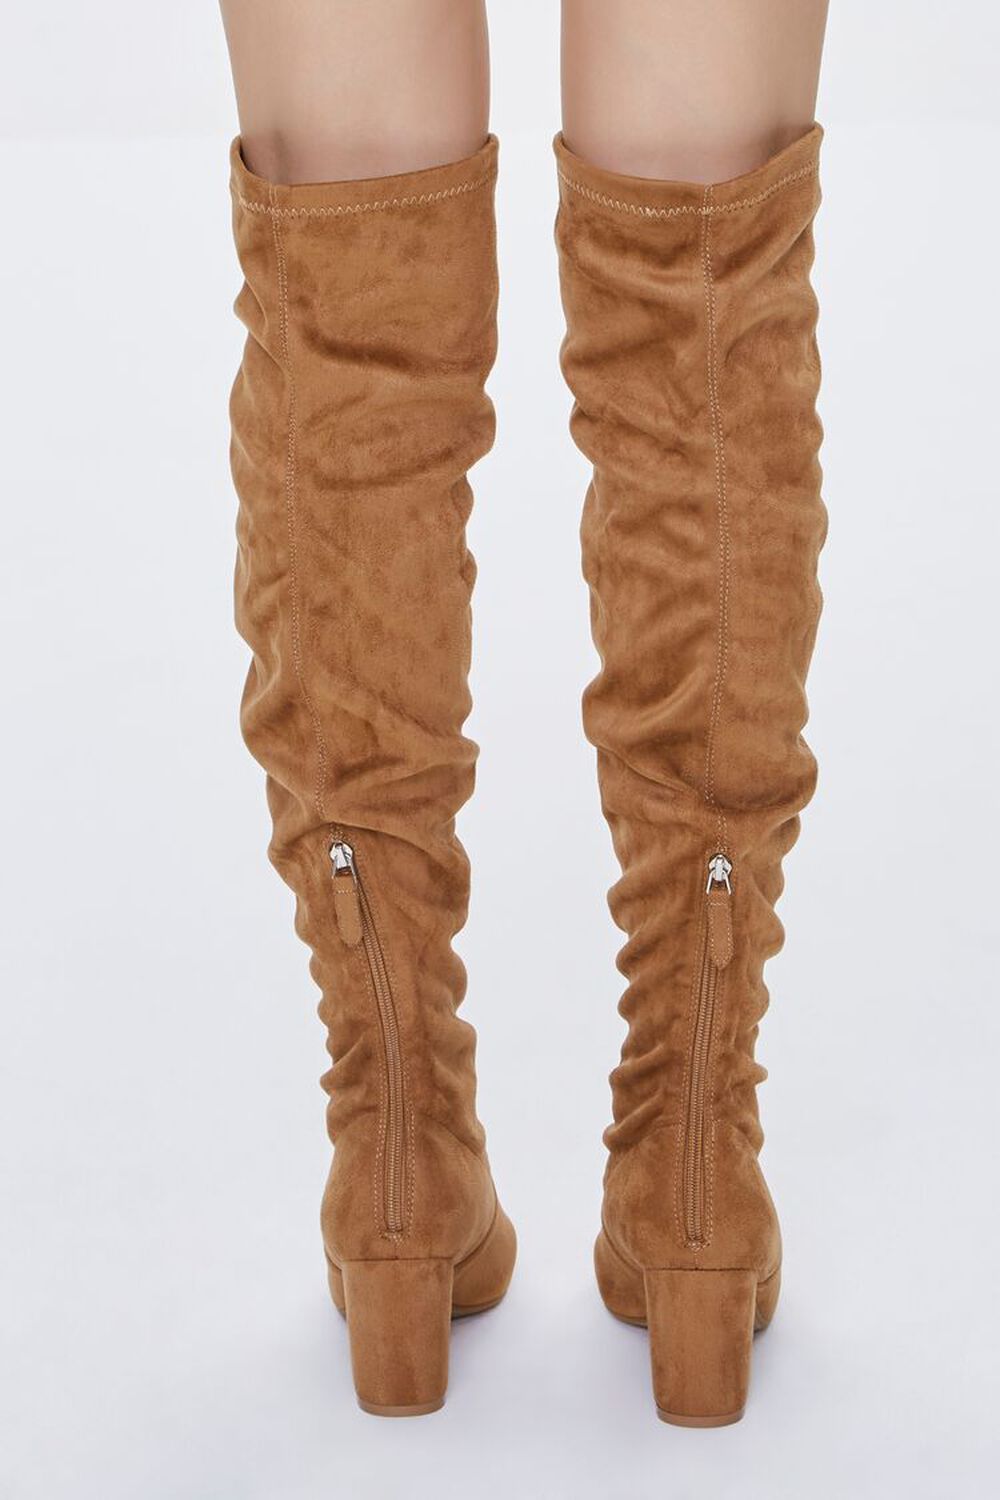 CHESTNUT Faux Suede Over-the-Knee Boots, image 3